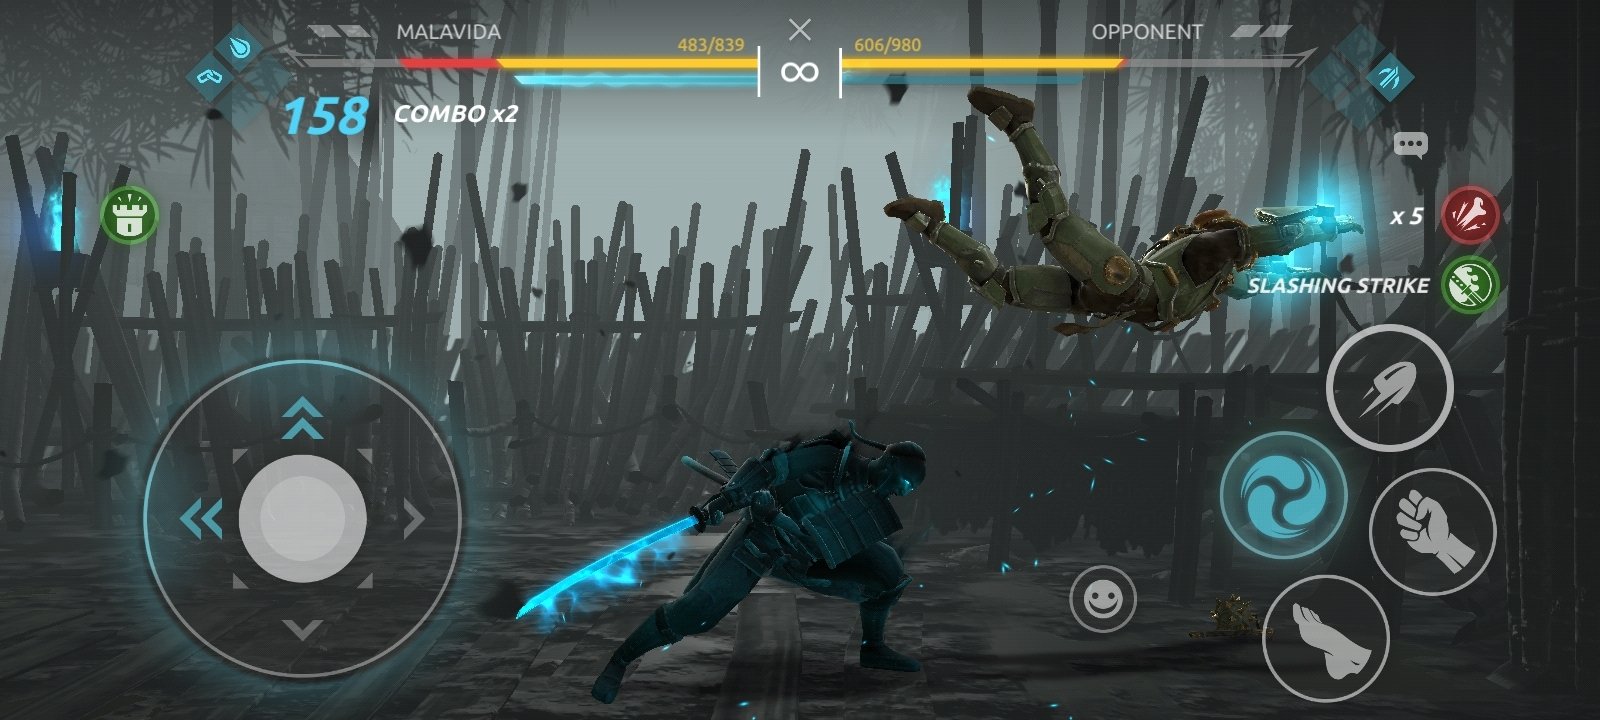 arena shadow fight 4 download free